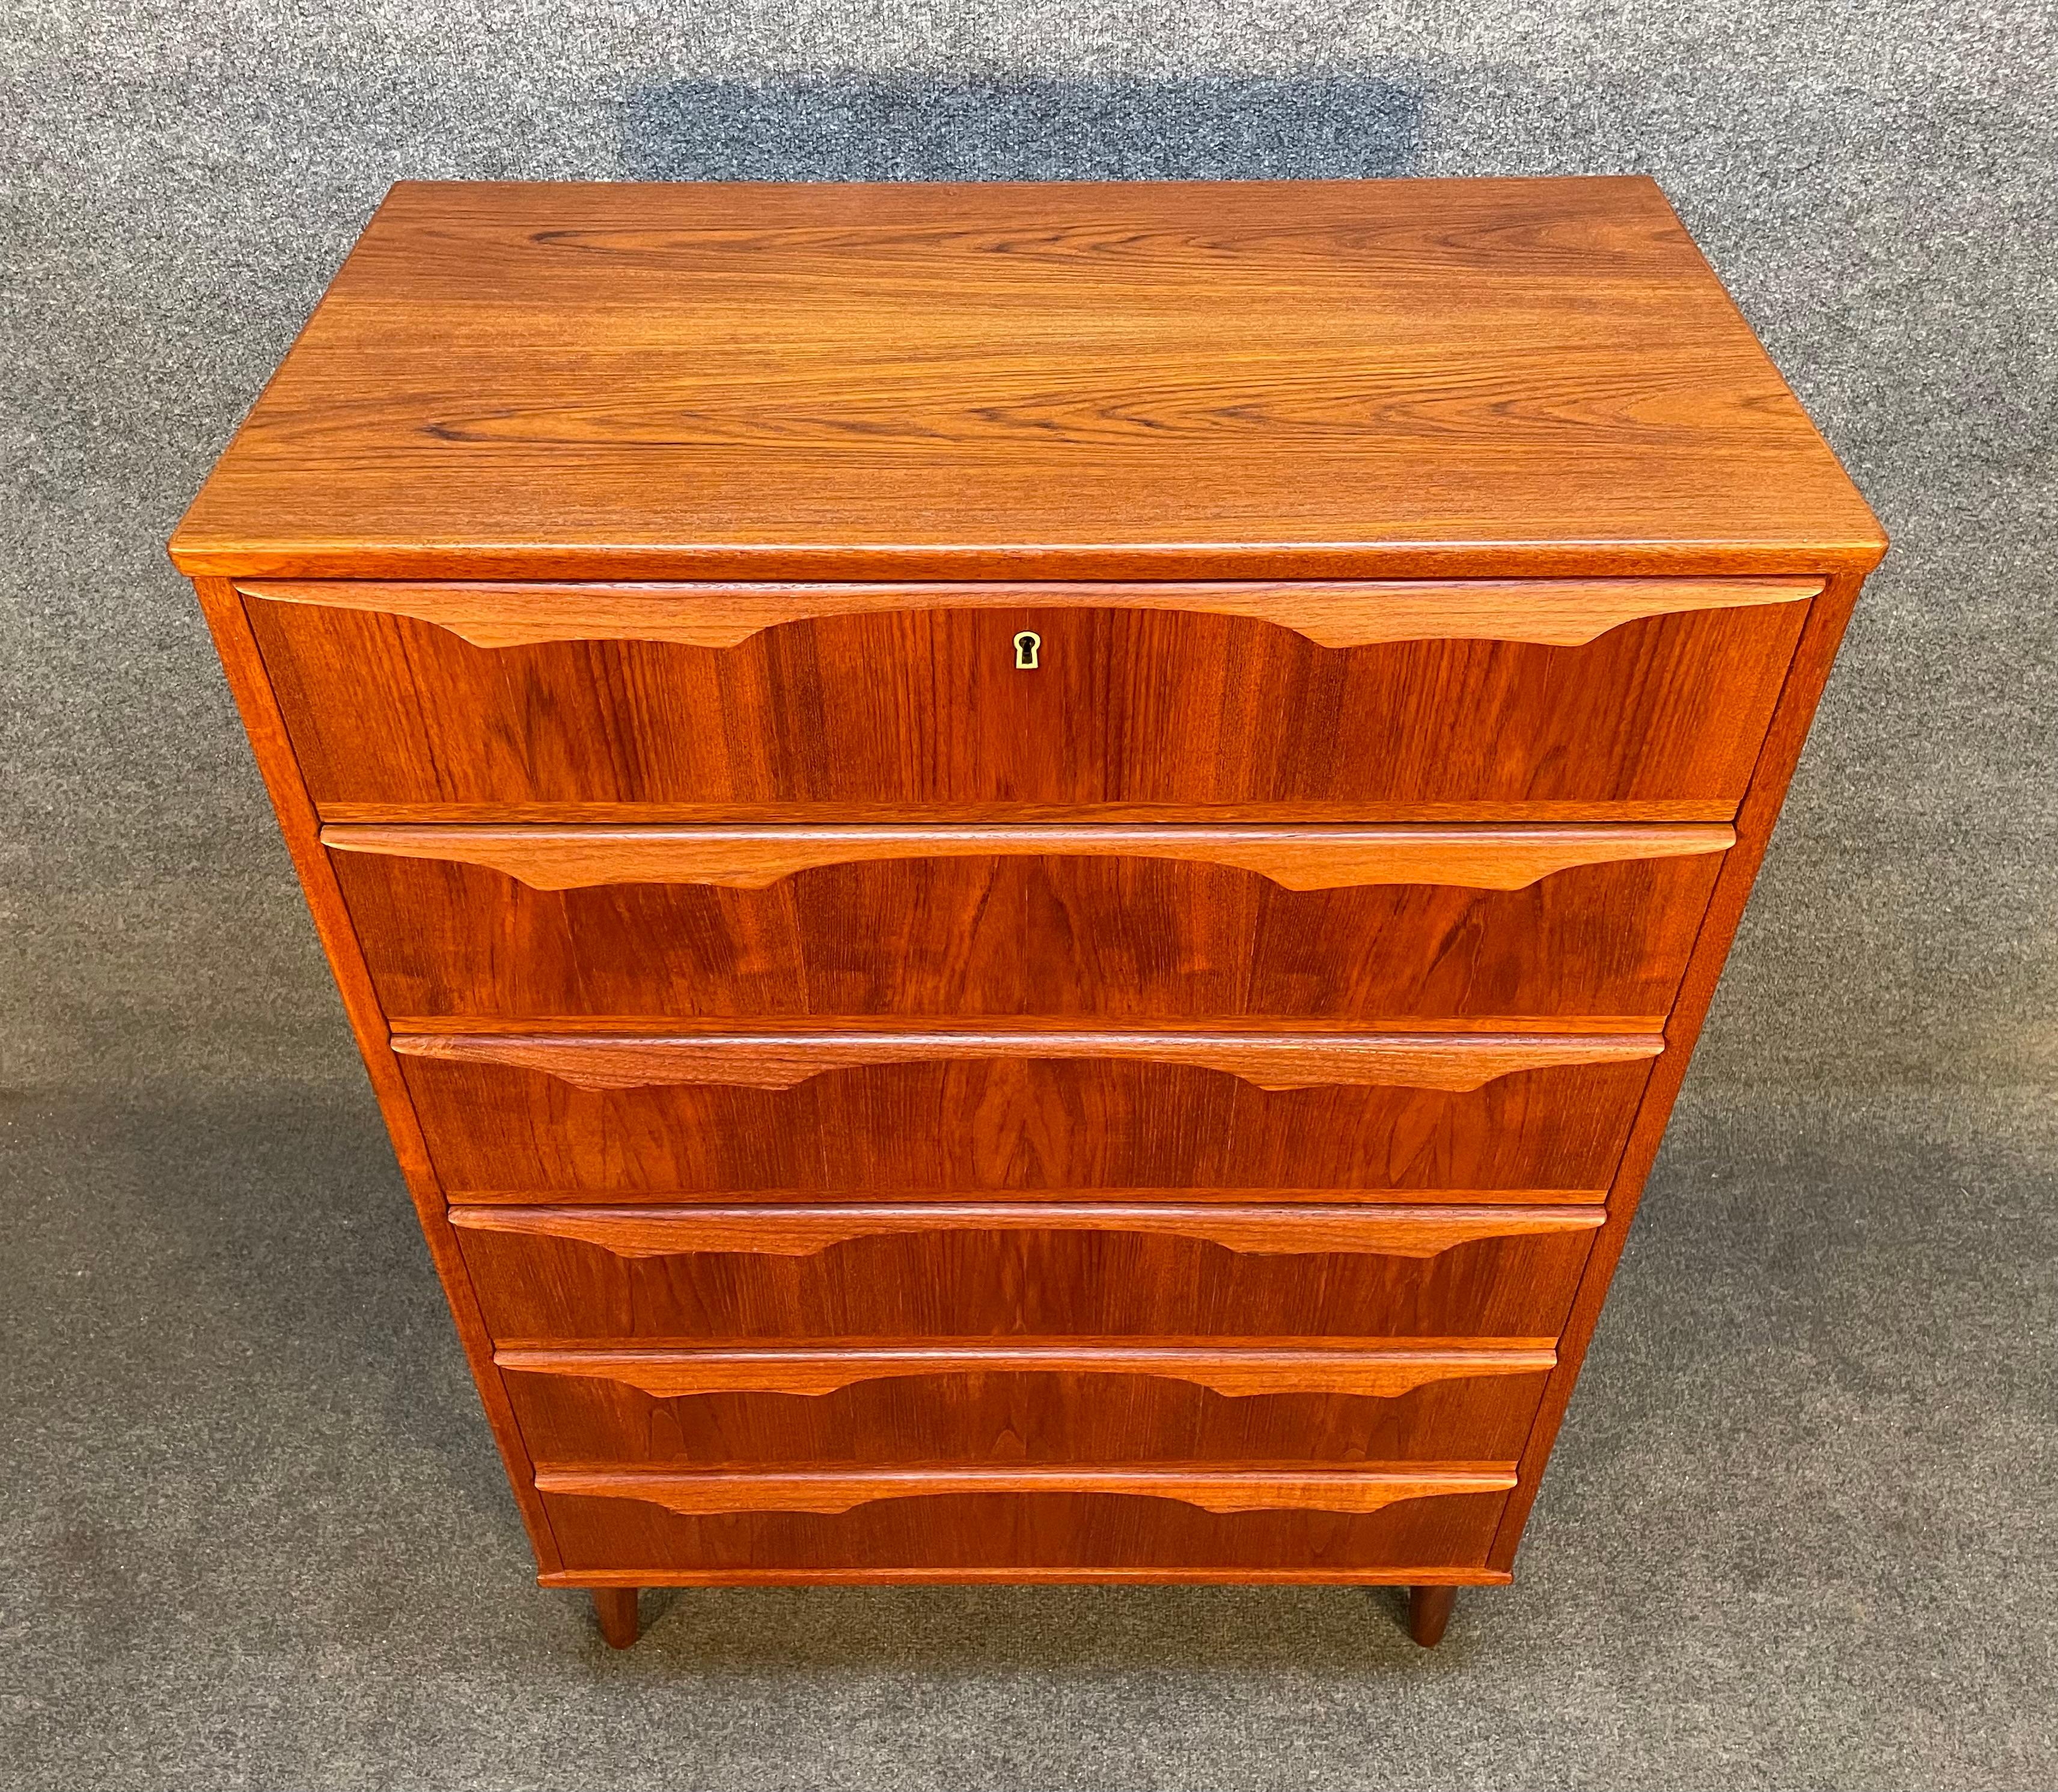 Here is a beautiful Scandinavian Modern chest of drawers dresser in teak wood designed by Klaus Okholm and manufactured by Trekanten Mobelfabrik in Denmark in the 1960s.
This lovely dresser, recently imported from Europe to California before its